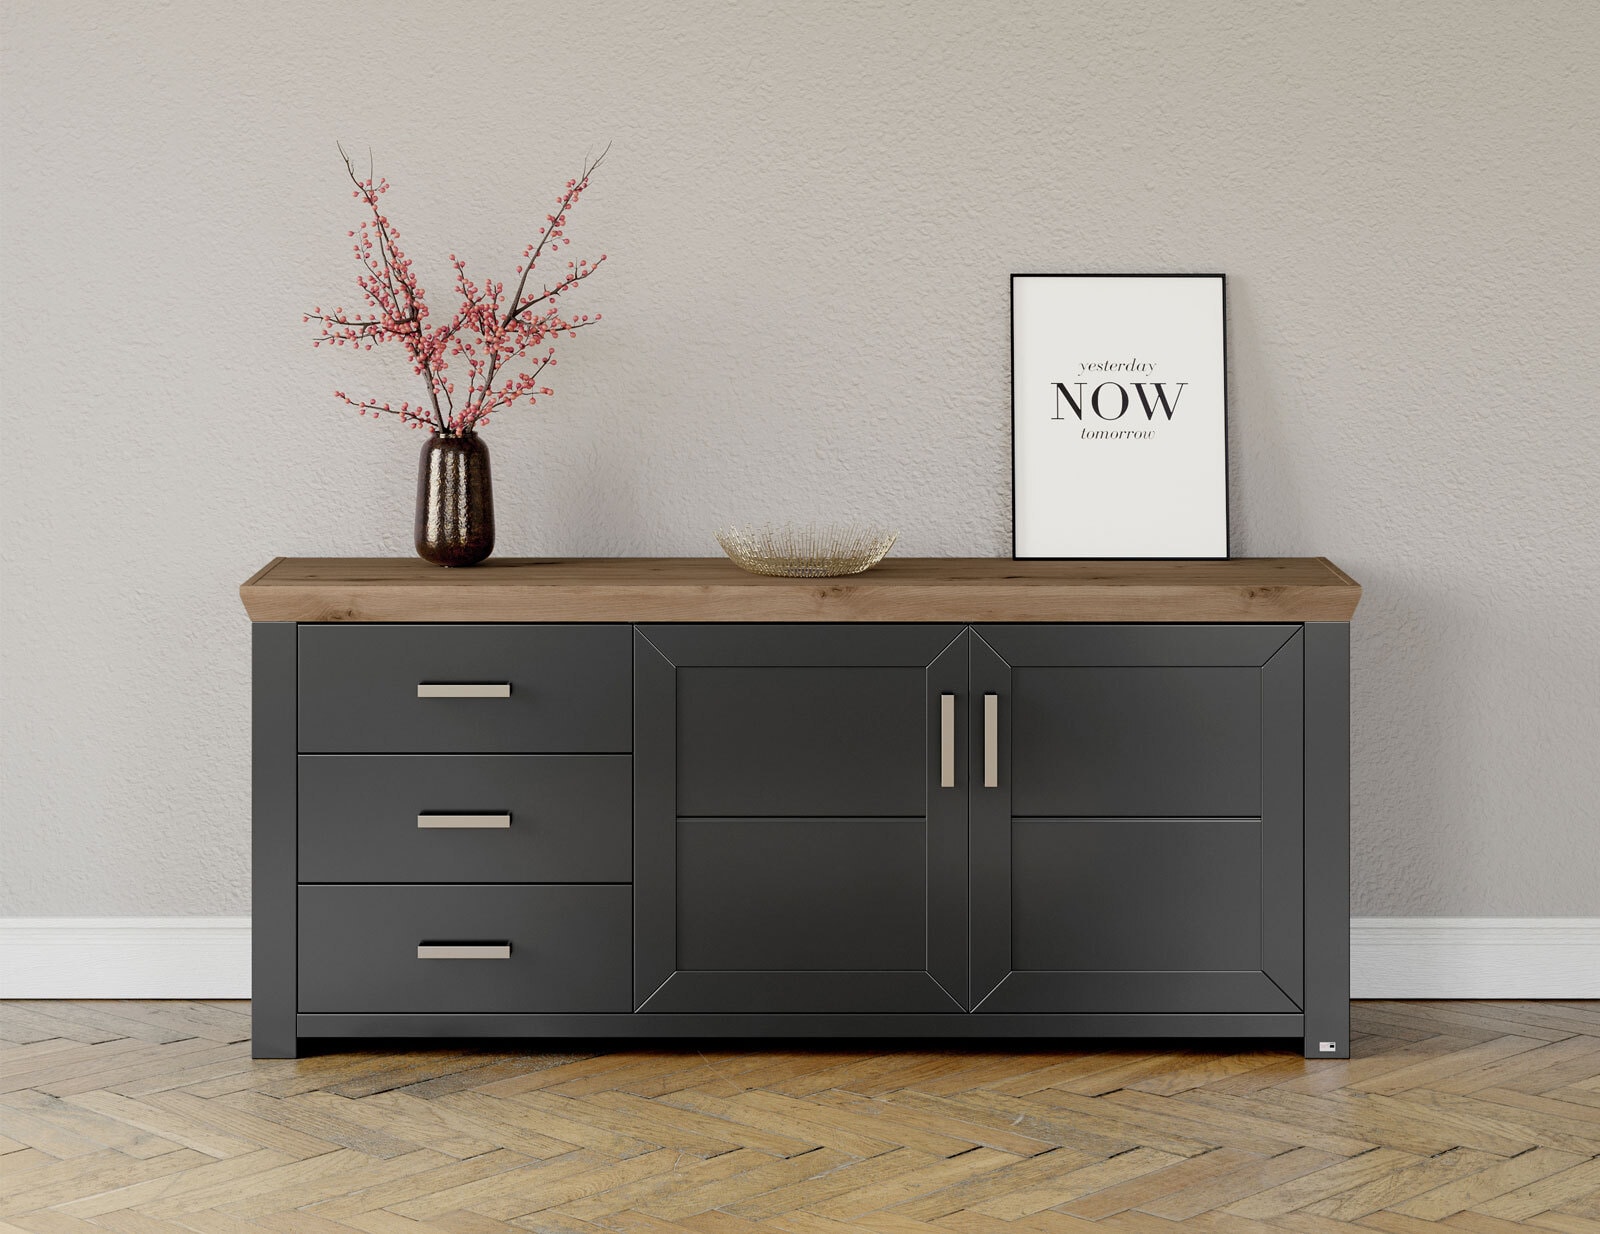 set one by Musterring Sideboard YORK 51 anthrazit /Eiche Artisan